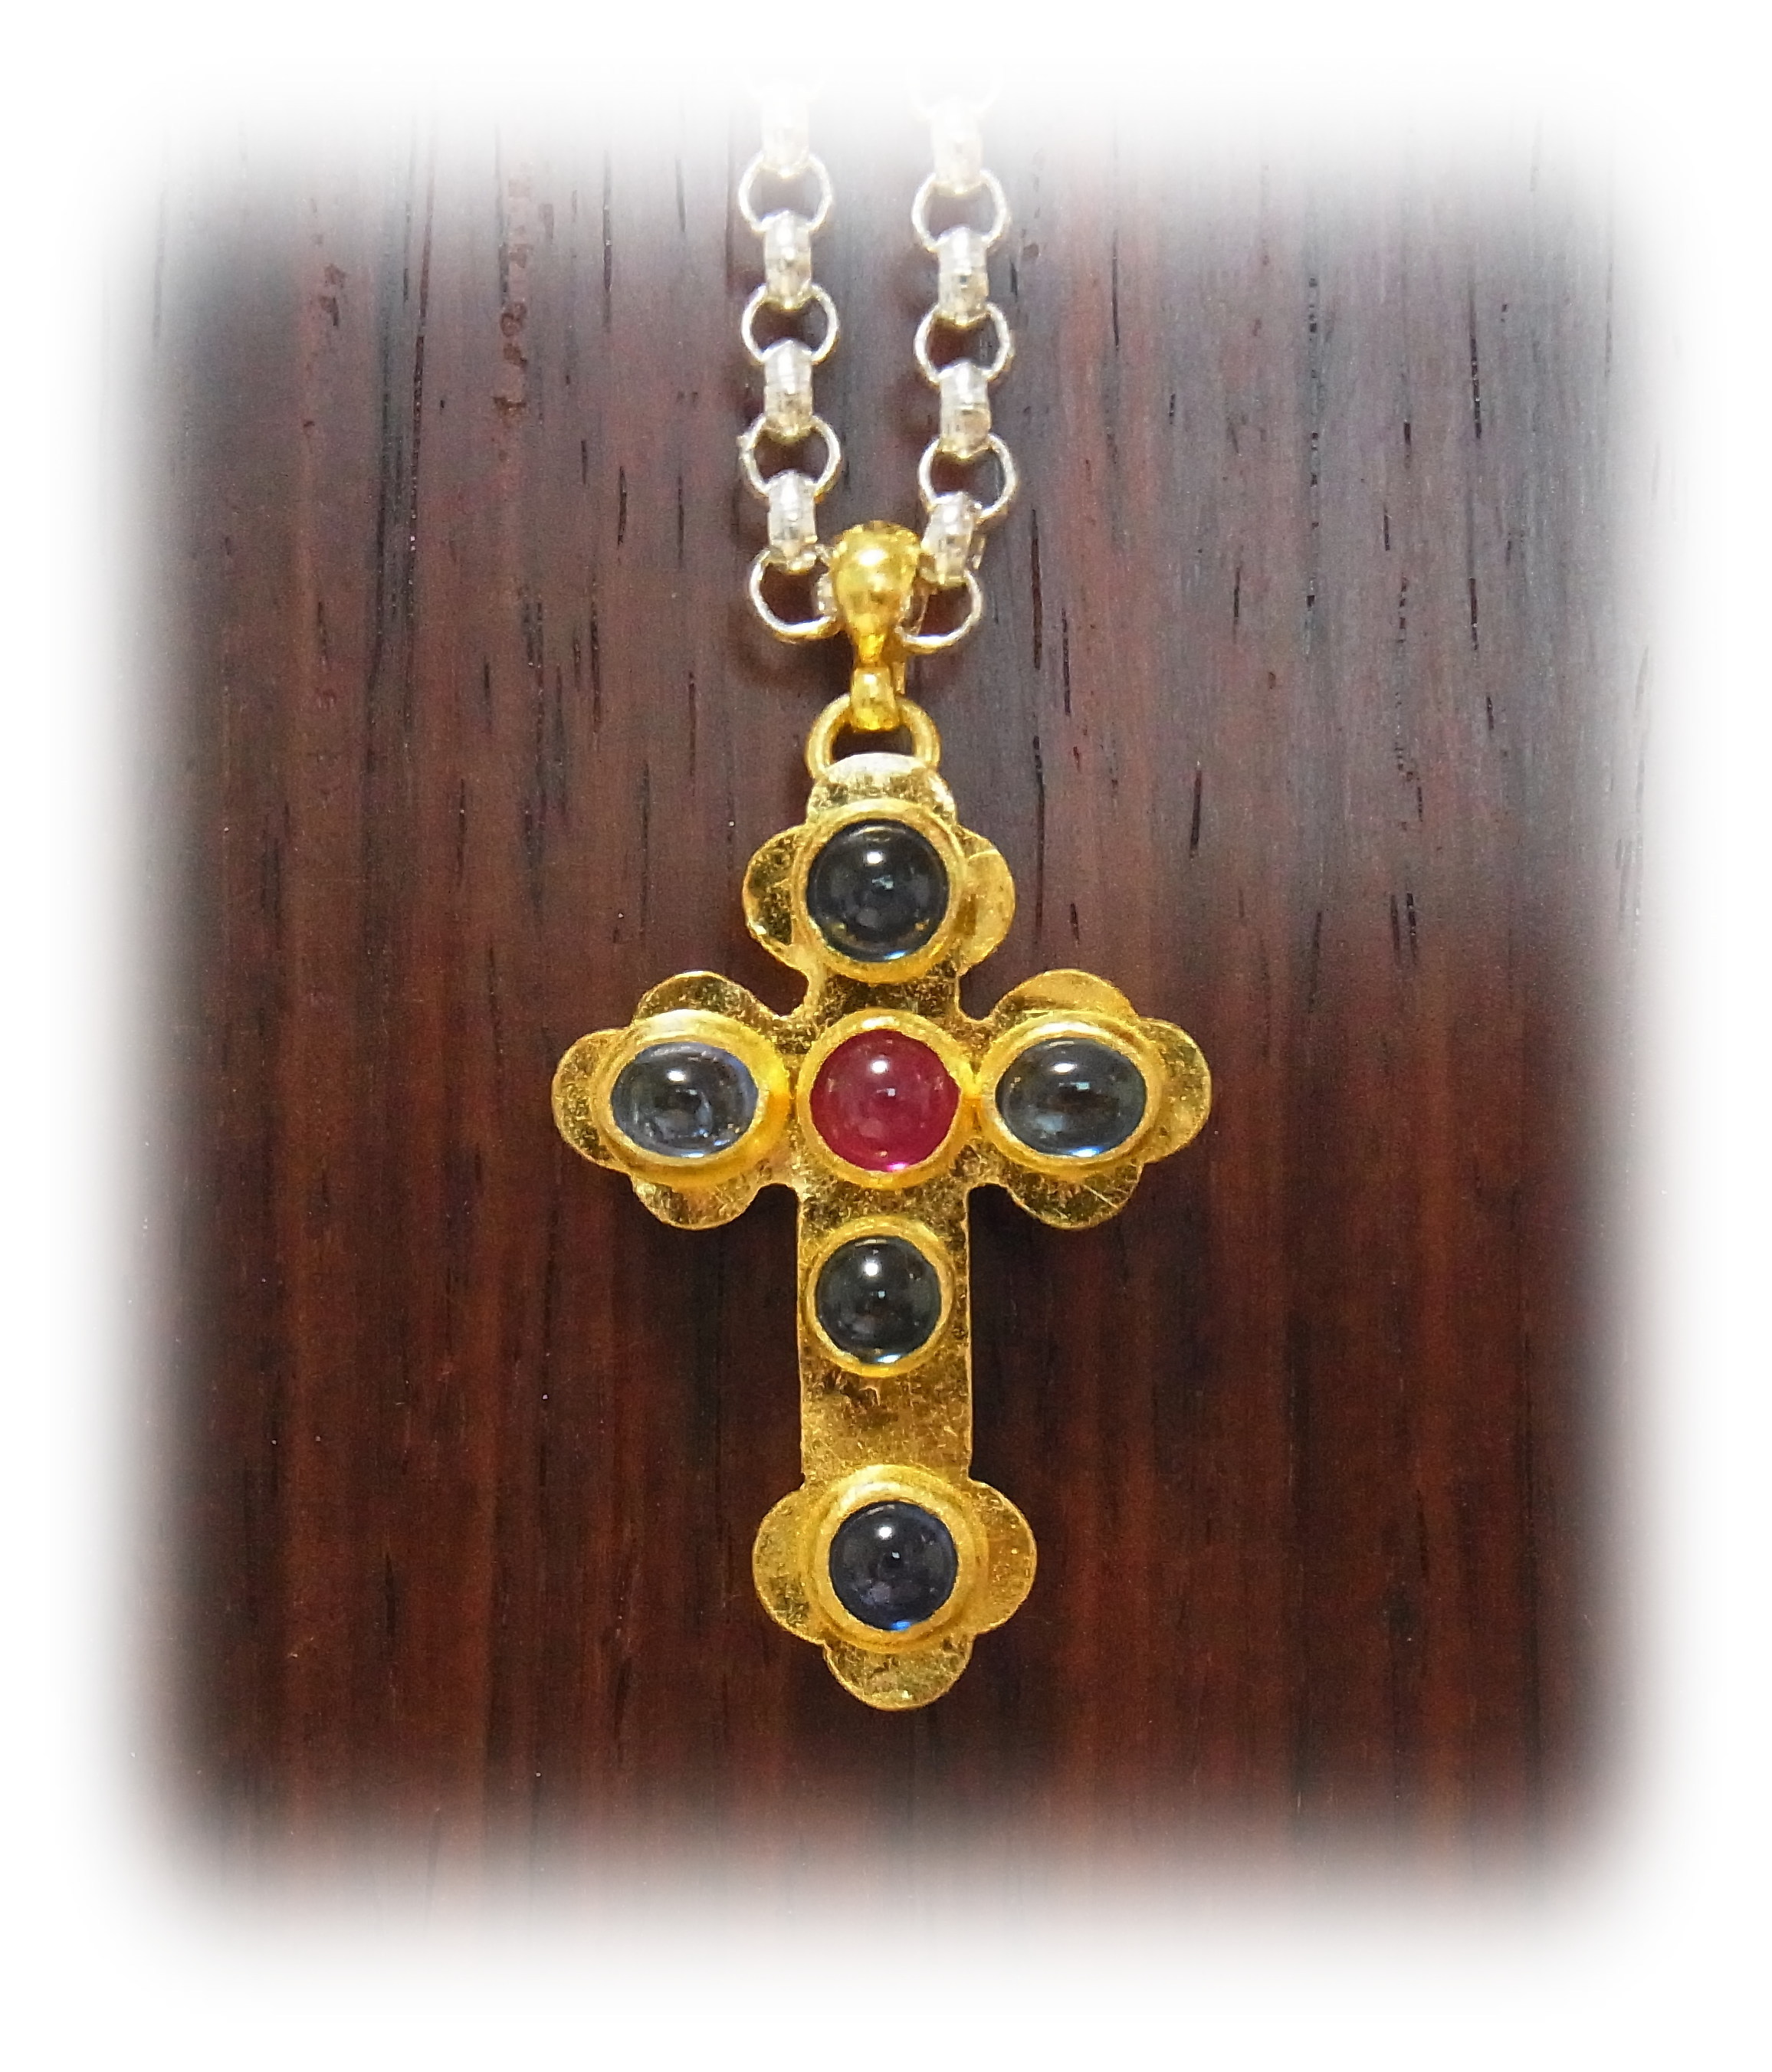 Byzantine gold cross with gemstones: Center stone is Ruby, others Blue Sapphire.